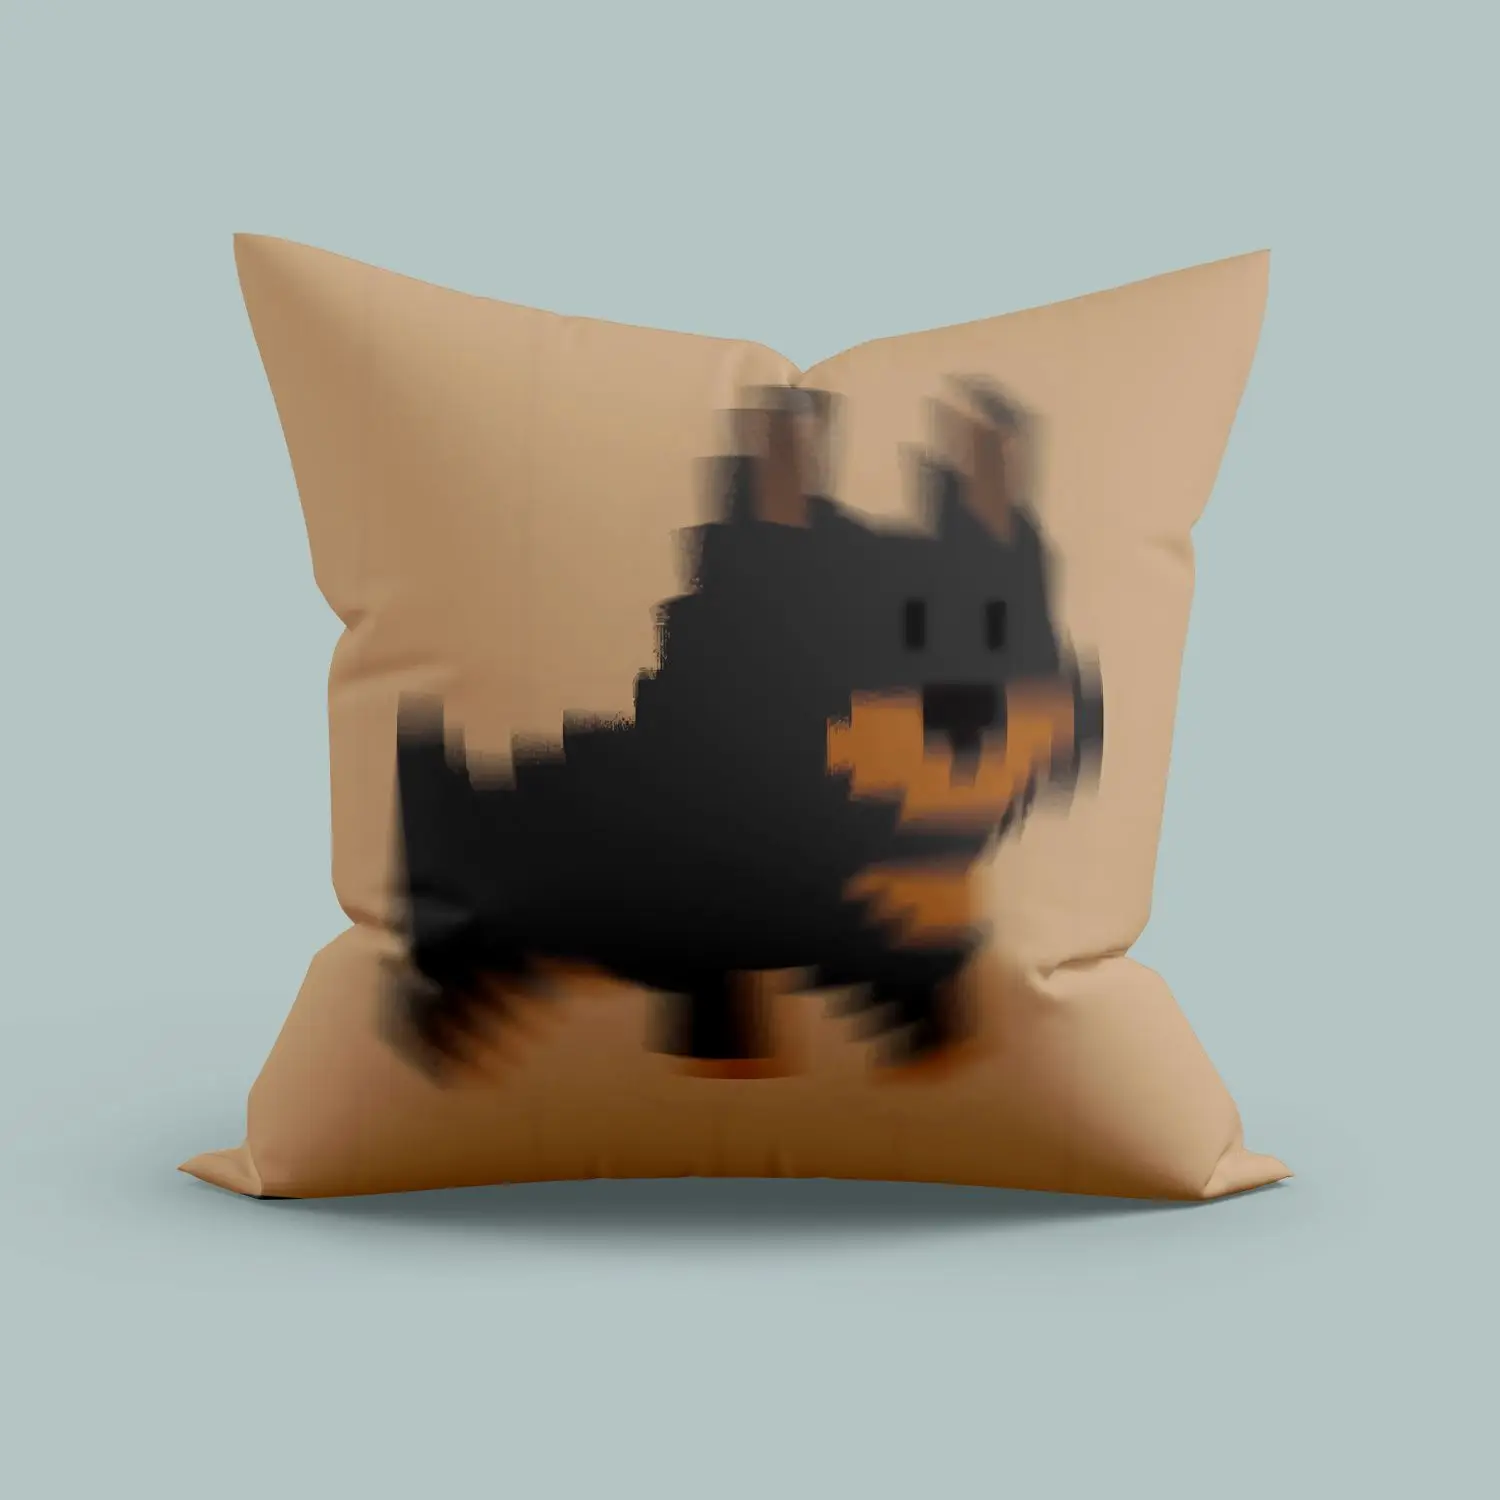 

Blurred Animals Pillows Case Cute Cat Sheep Pillowcase 40x40 Cm Boy Girl Room Bed Pillow Covers Decorative Home Decor Bedroom